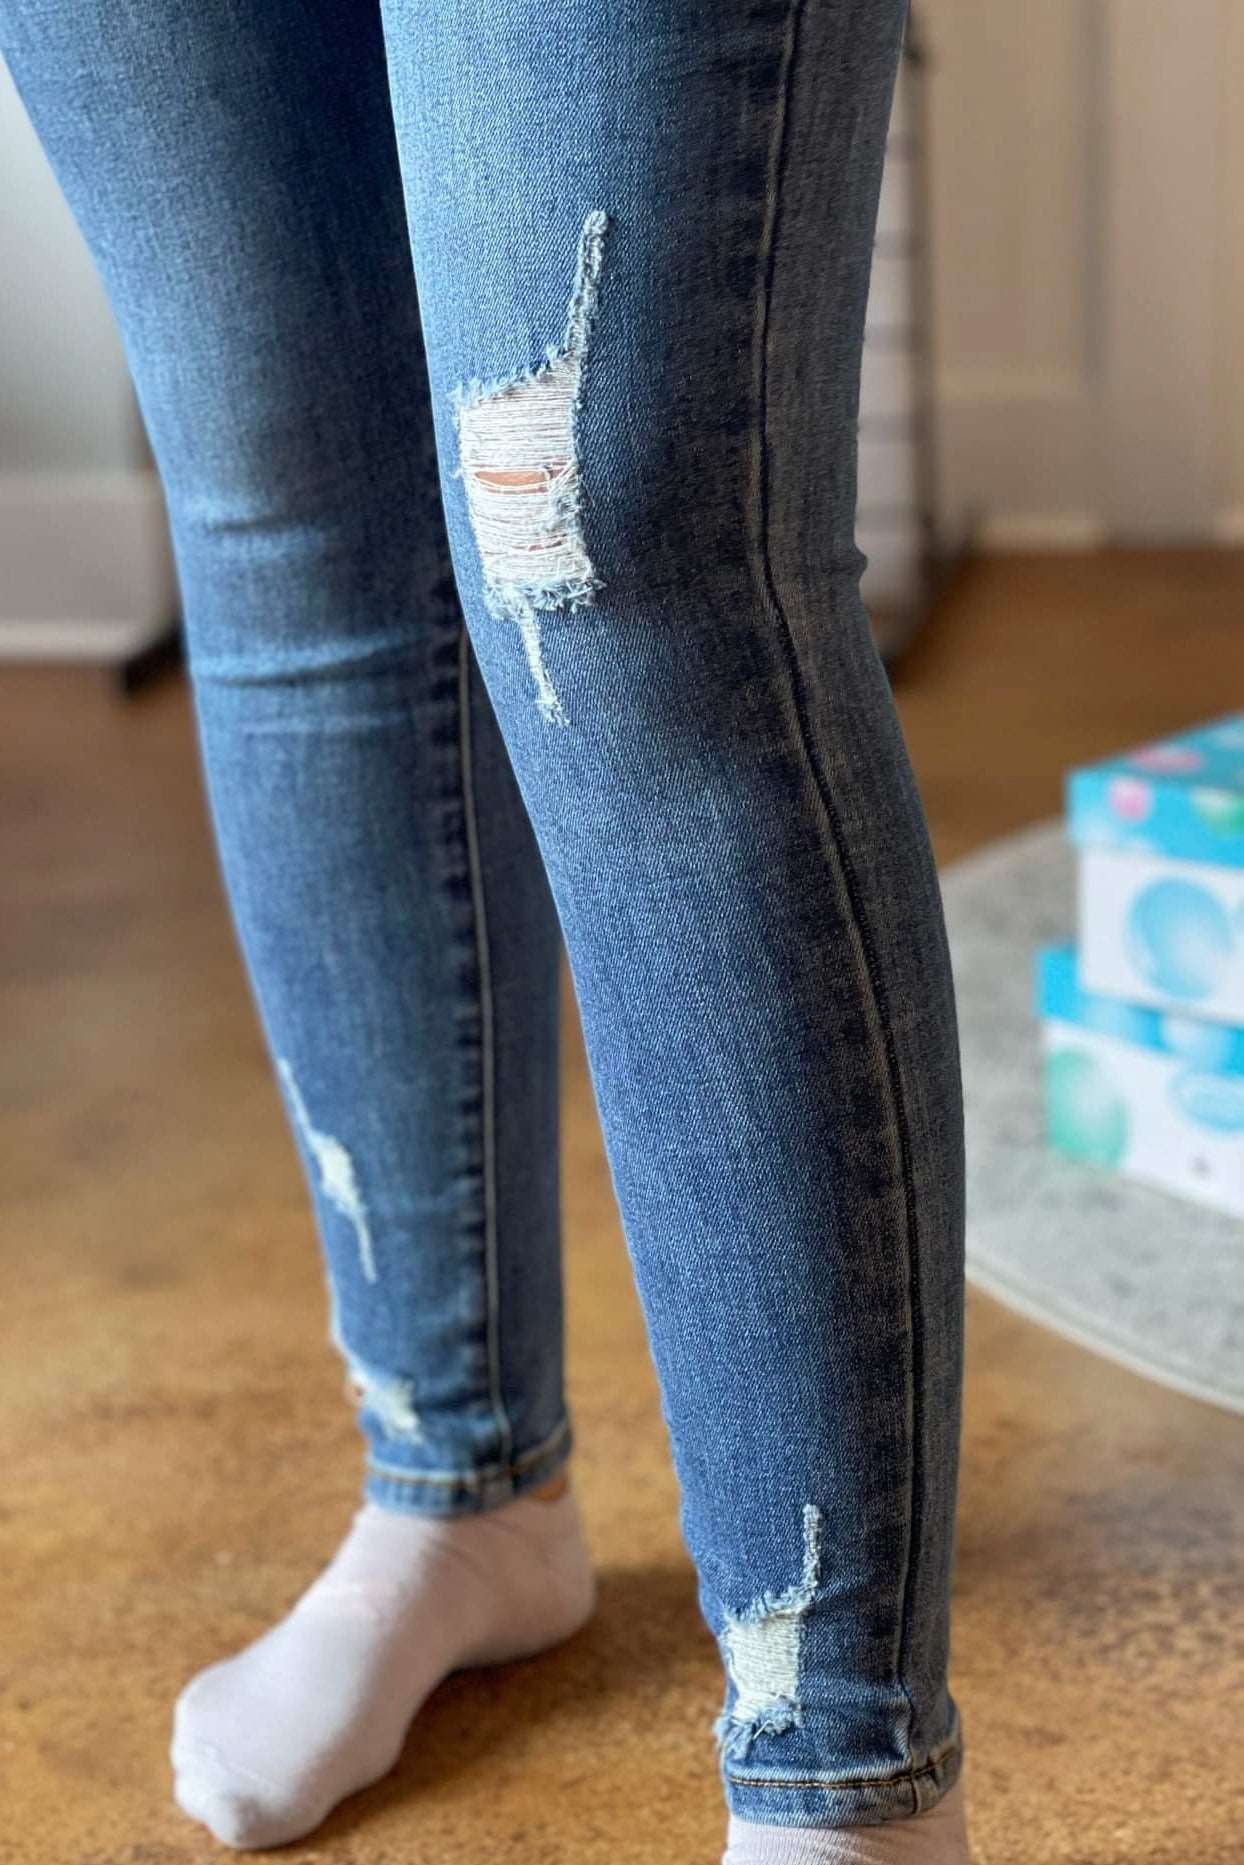 WB Distressed Jeans - Essential Southern Charm